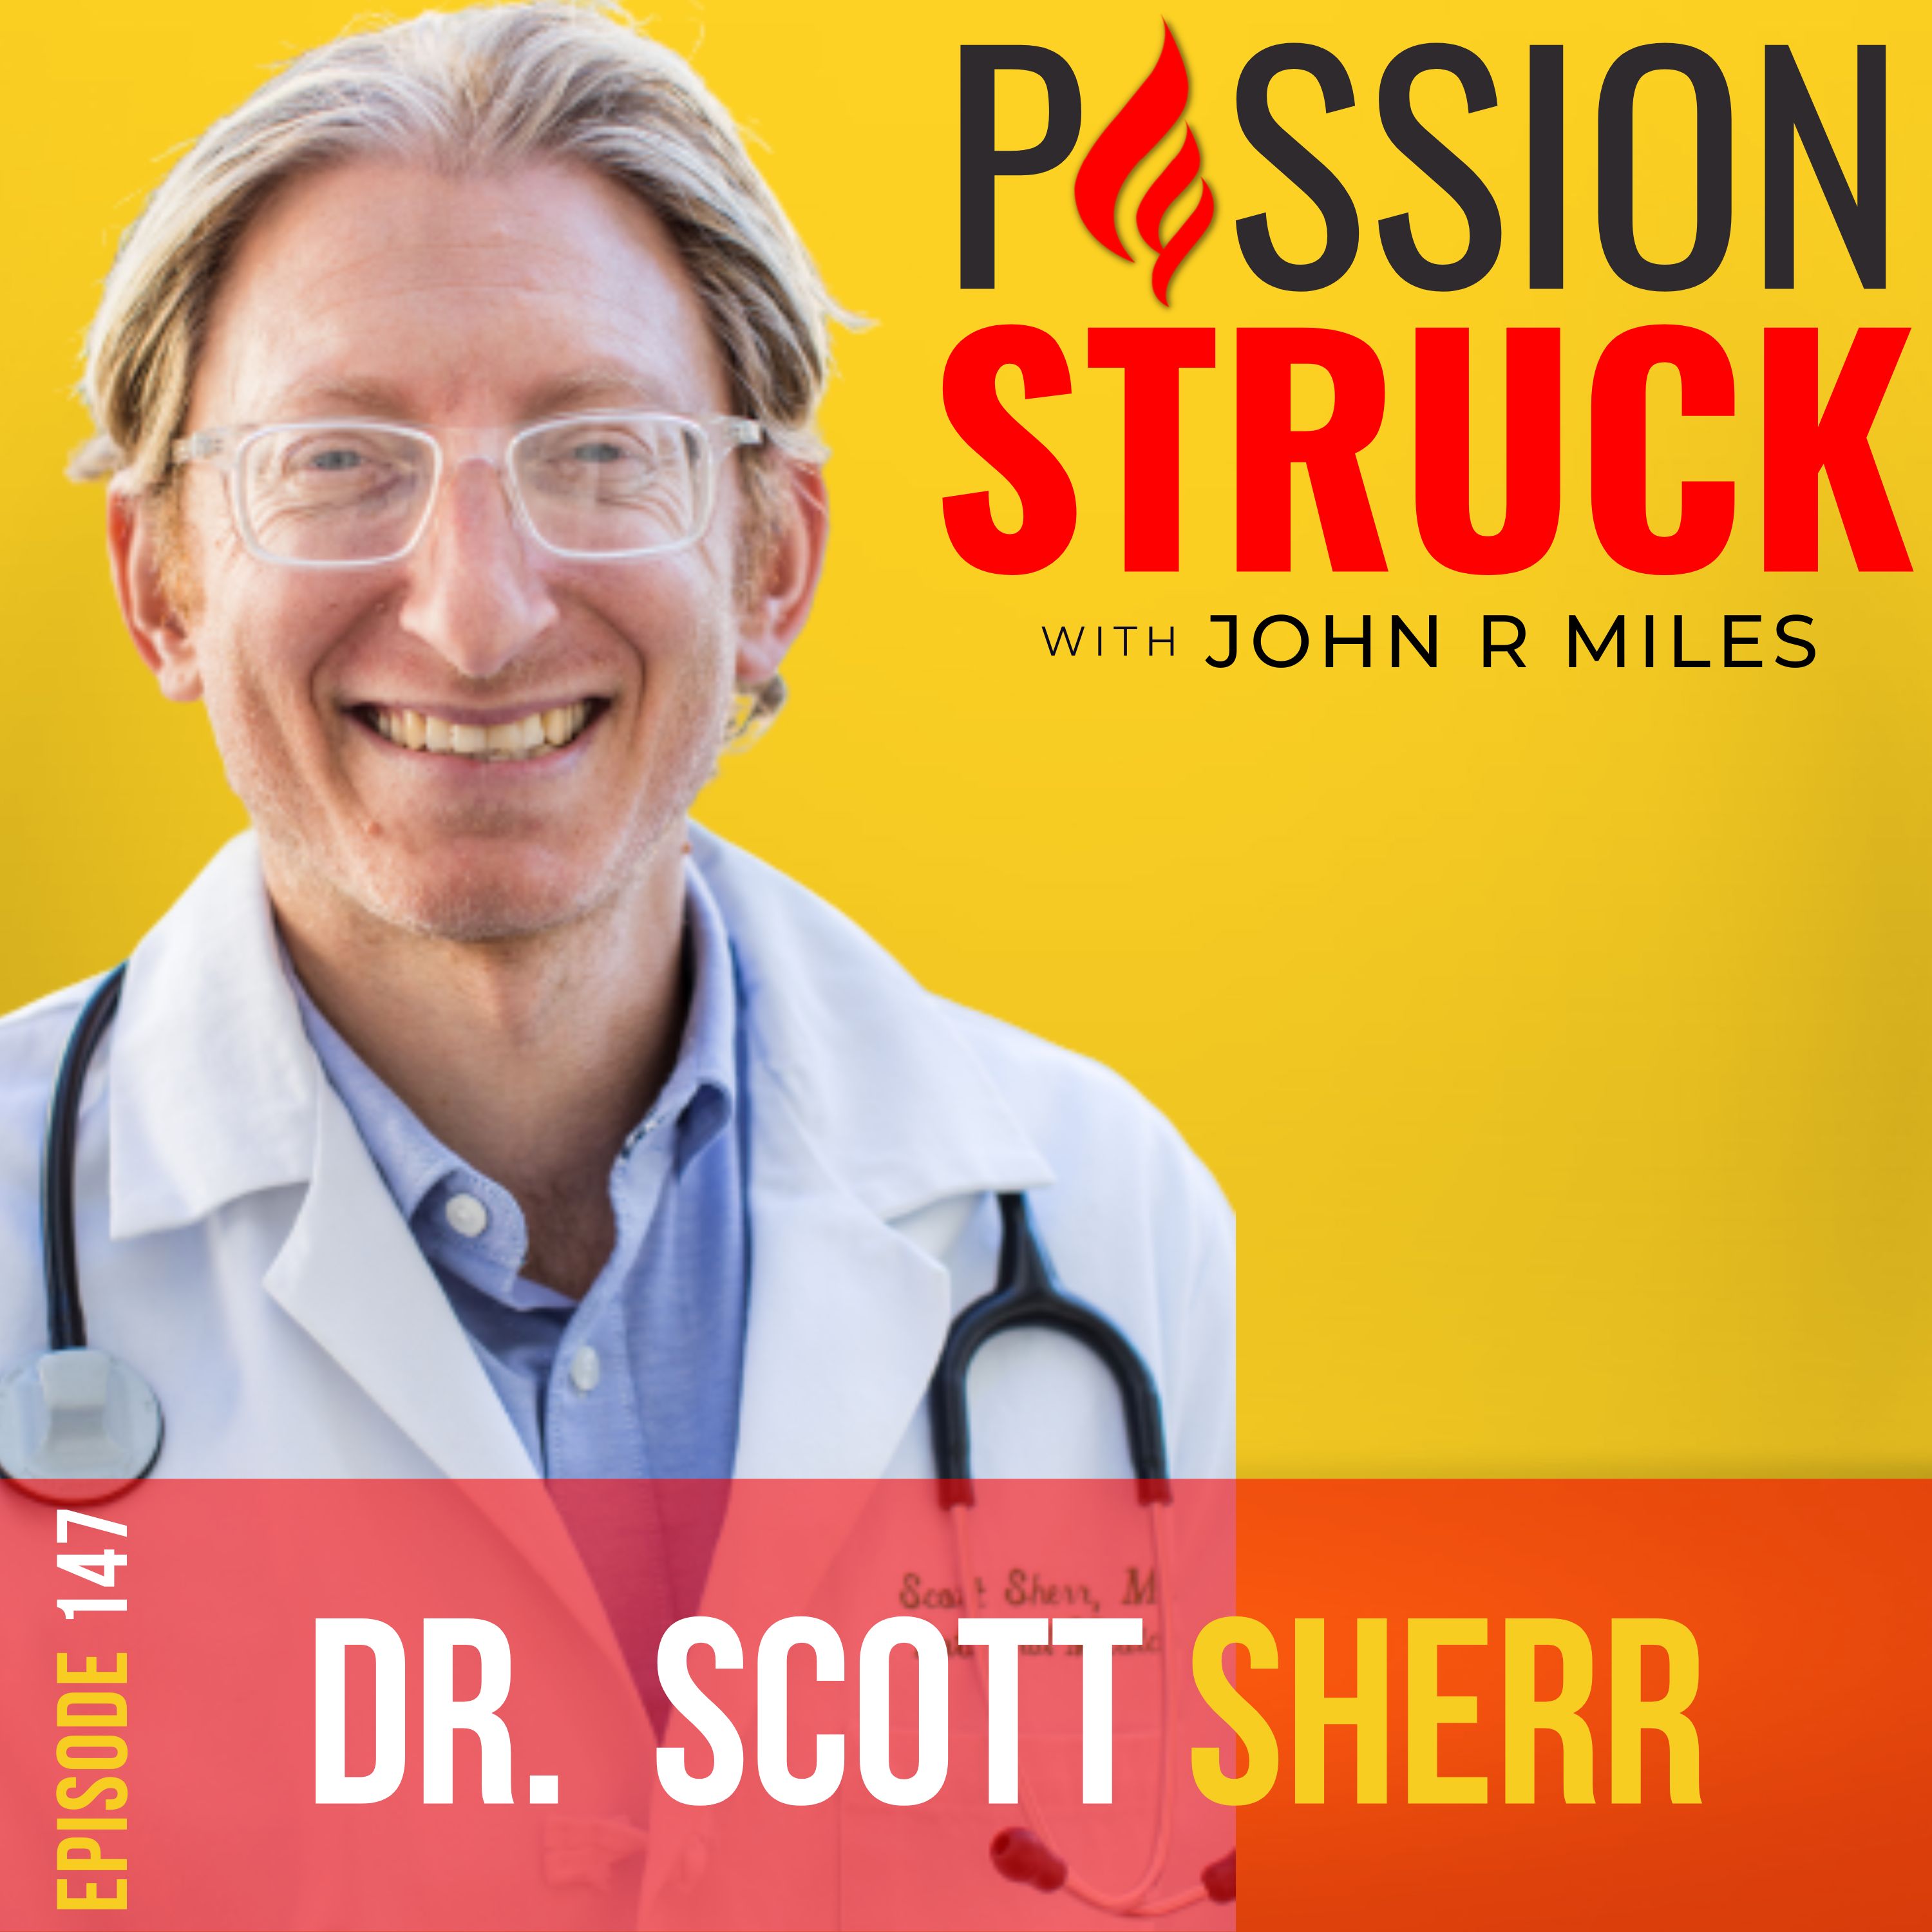 Passion Struck podcast album cover for episode 147 featuring Dr. Scott Sherr